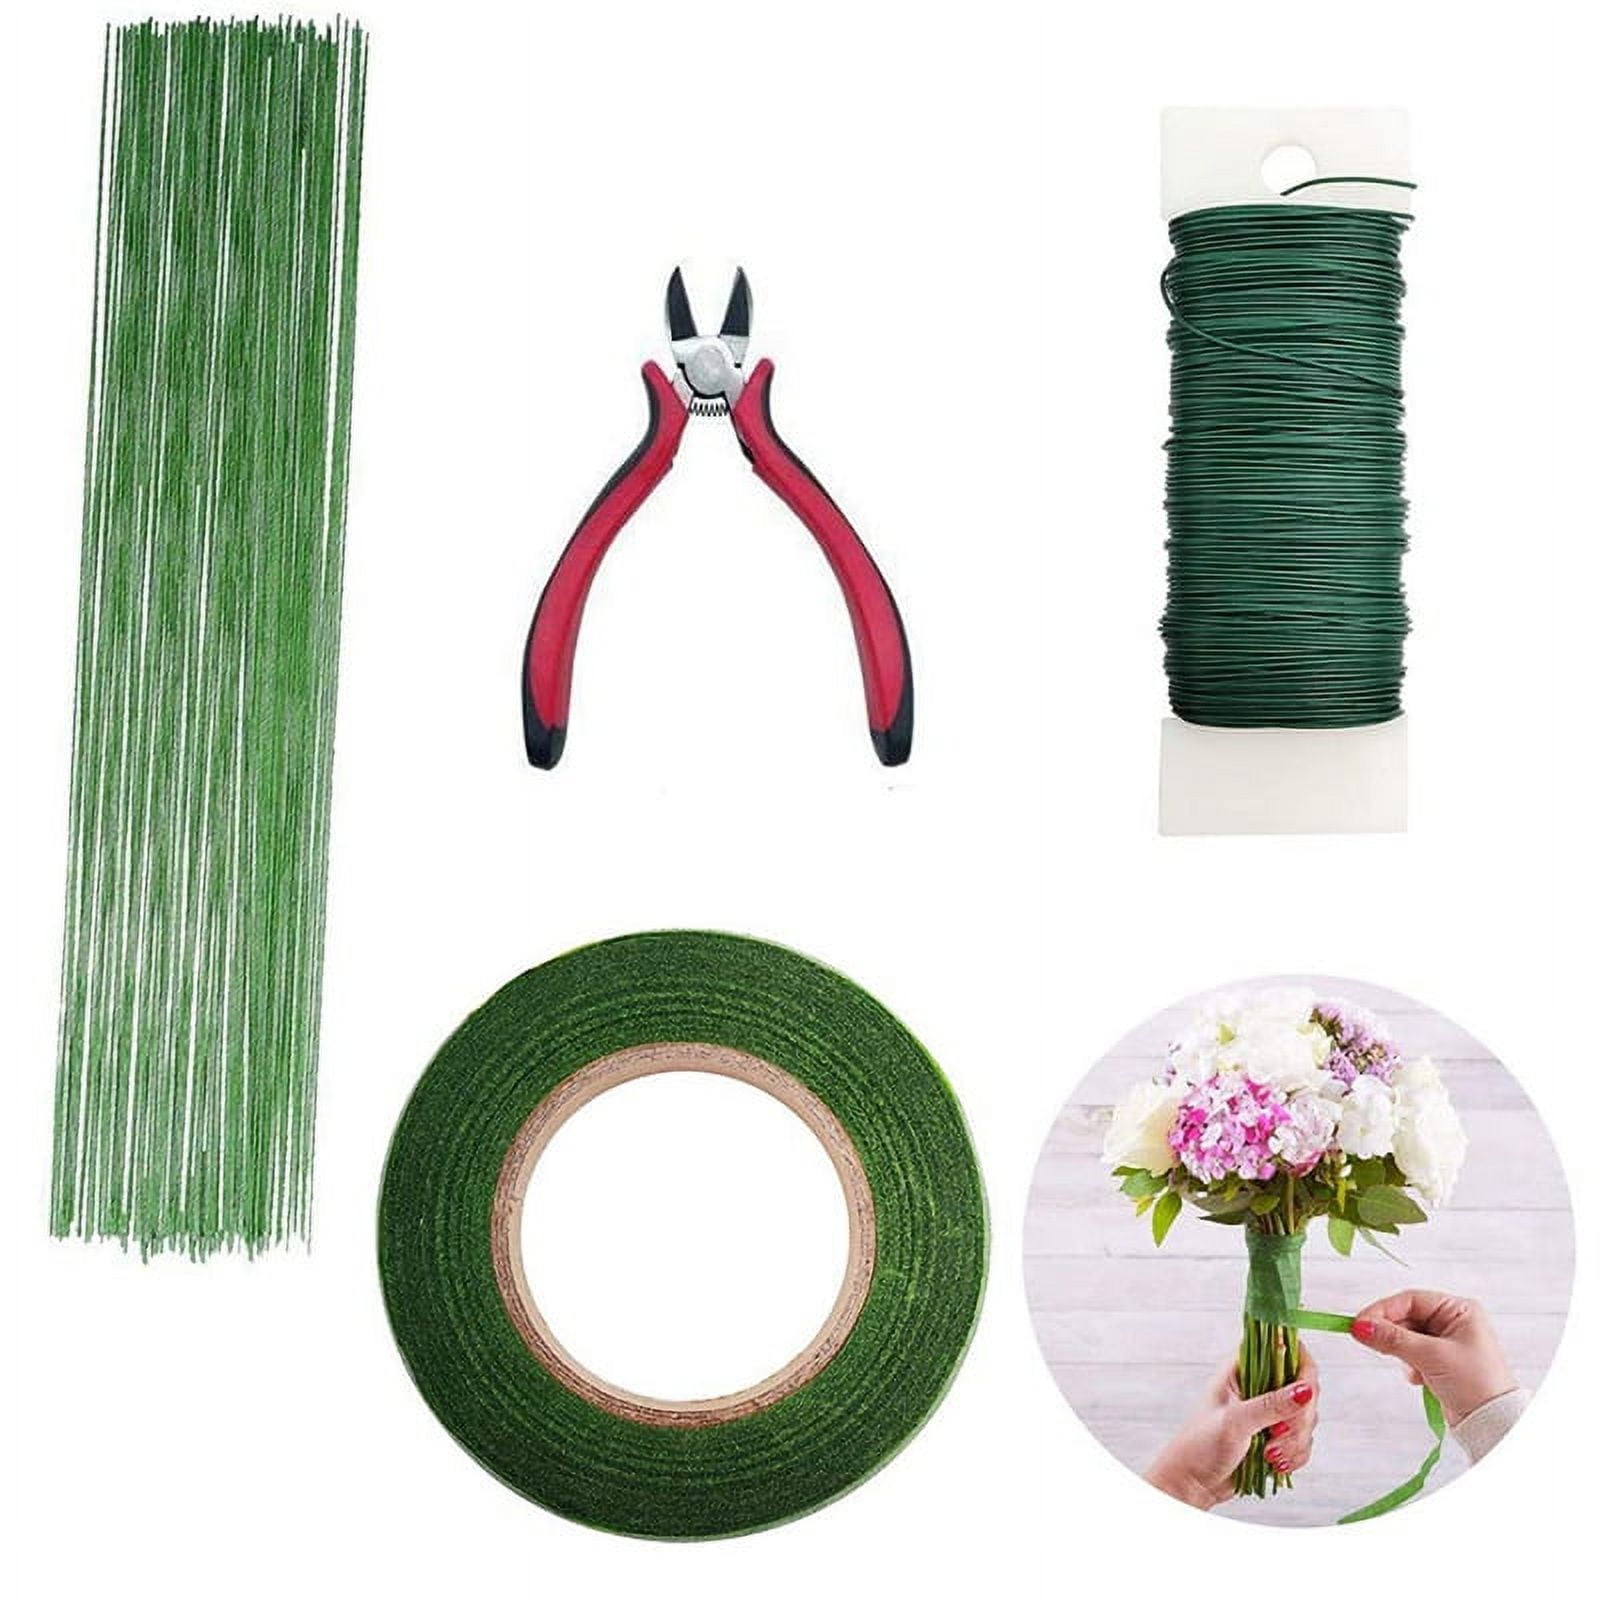 Floral Tape - 12-Pack Florist Tape, Green Floral Adhesives, Perfect for  Bouquet Stem Wrapping, Floral Arrangement and Crafts, 0.47 Inches x 30  Yards